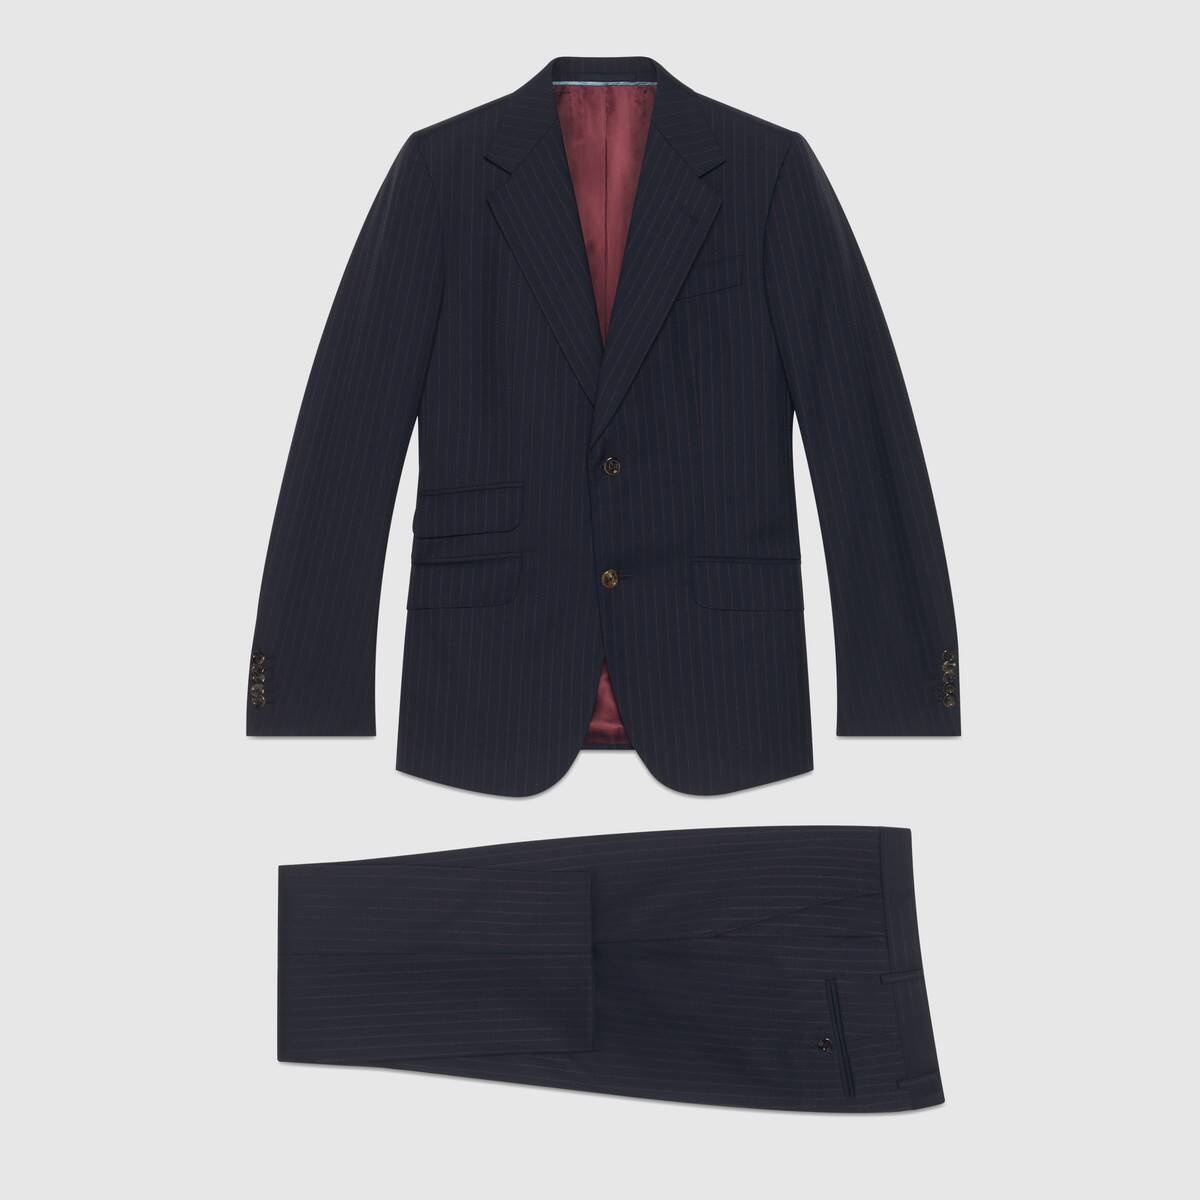 Fitted Gucci pinstripe suit - 1